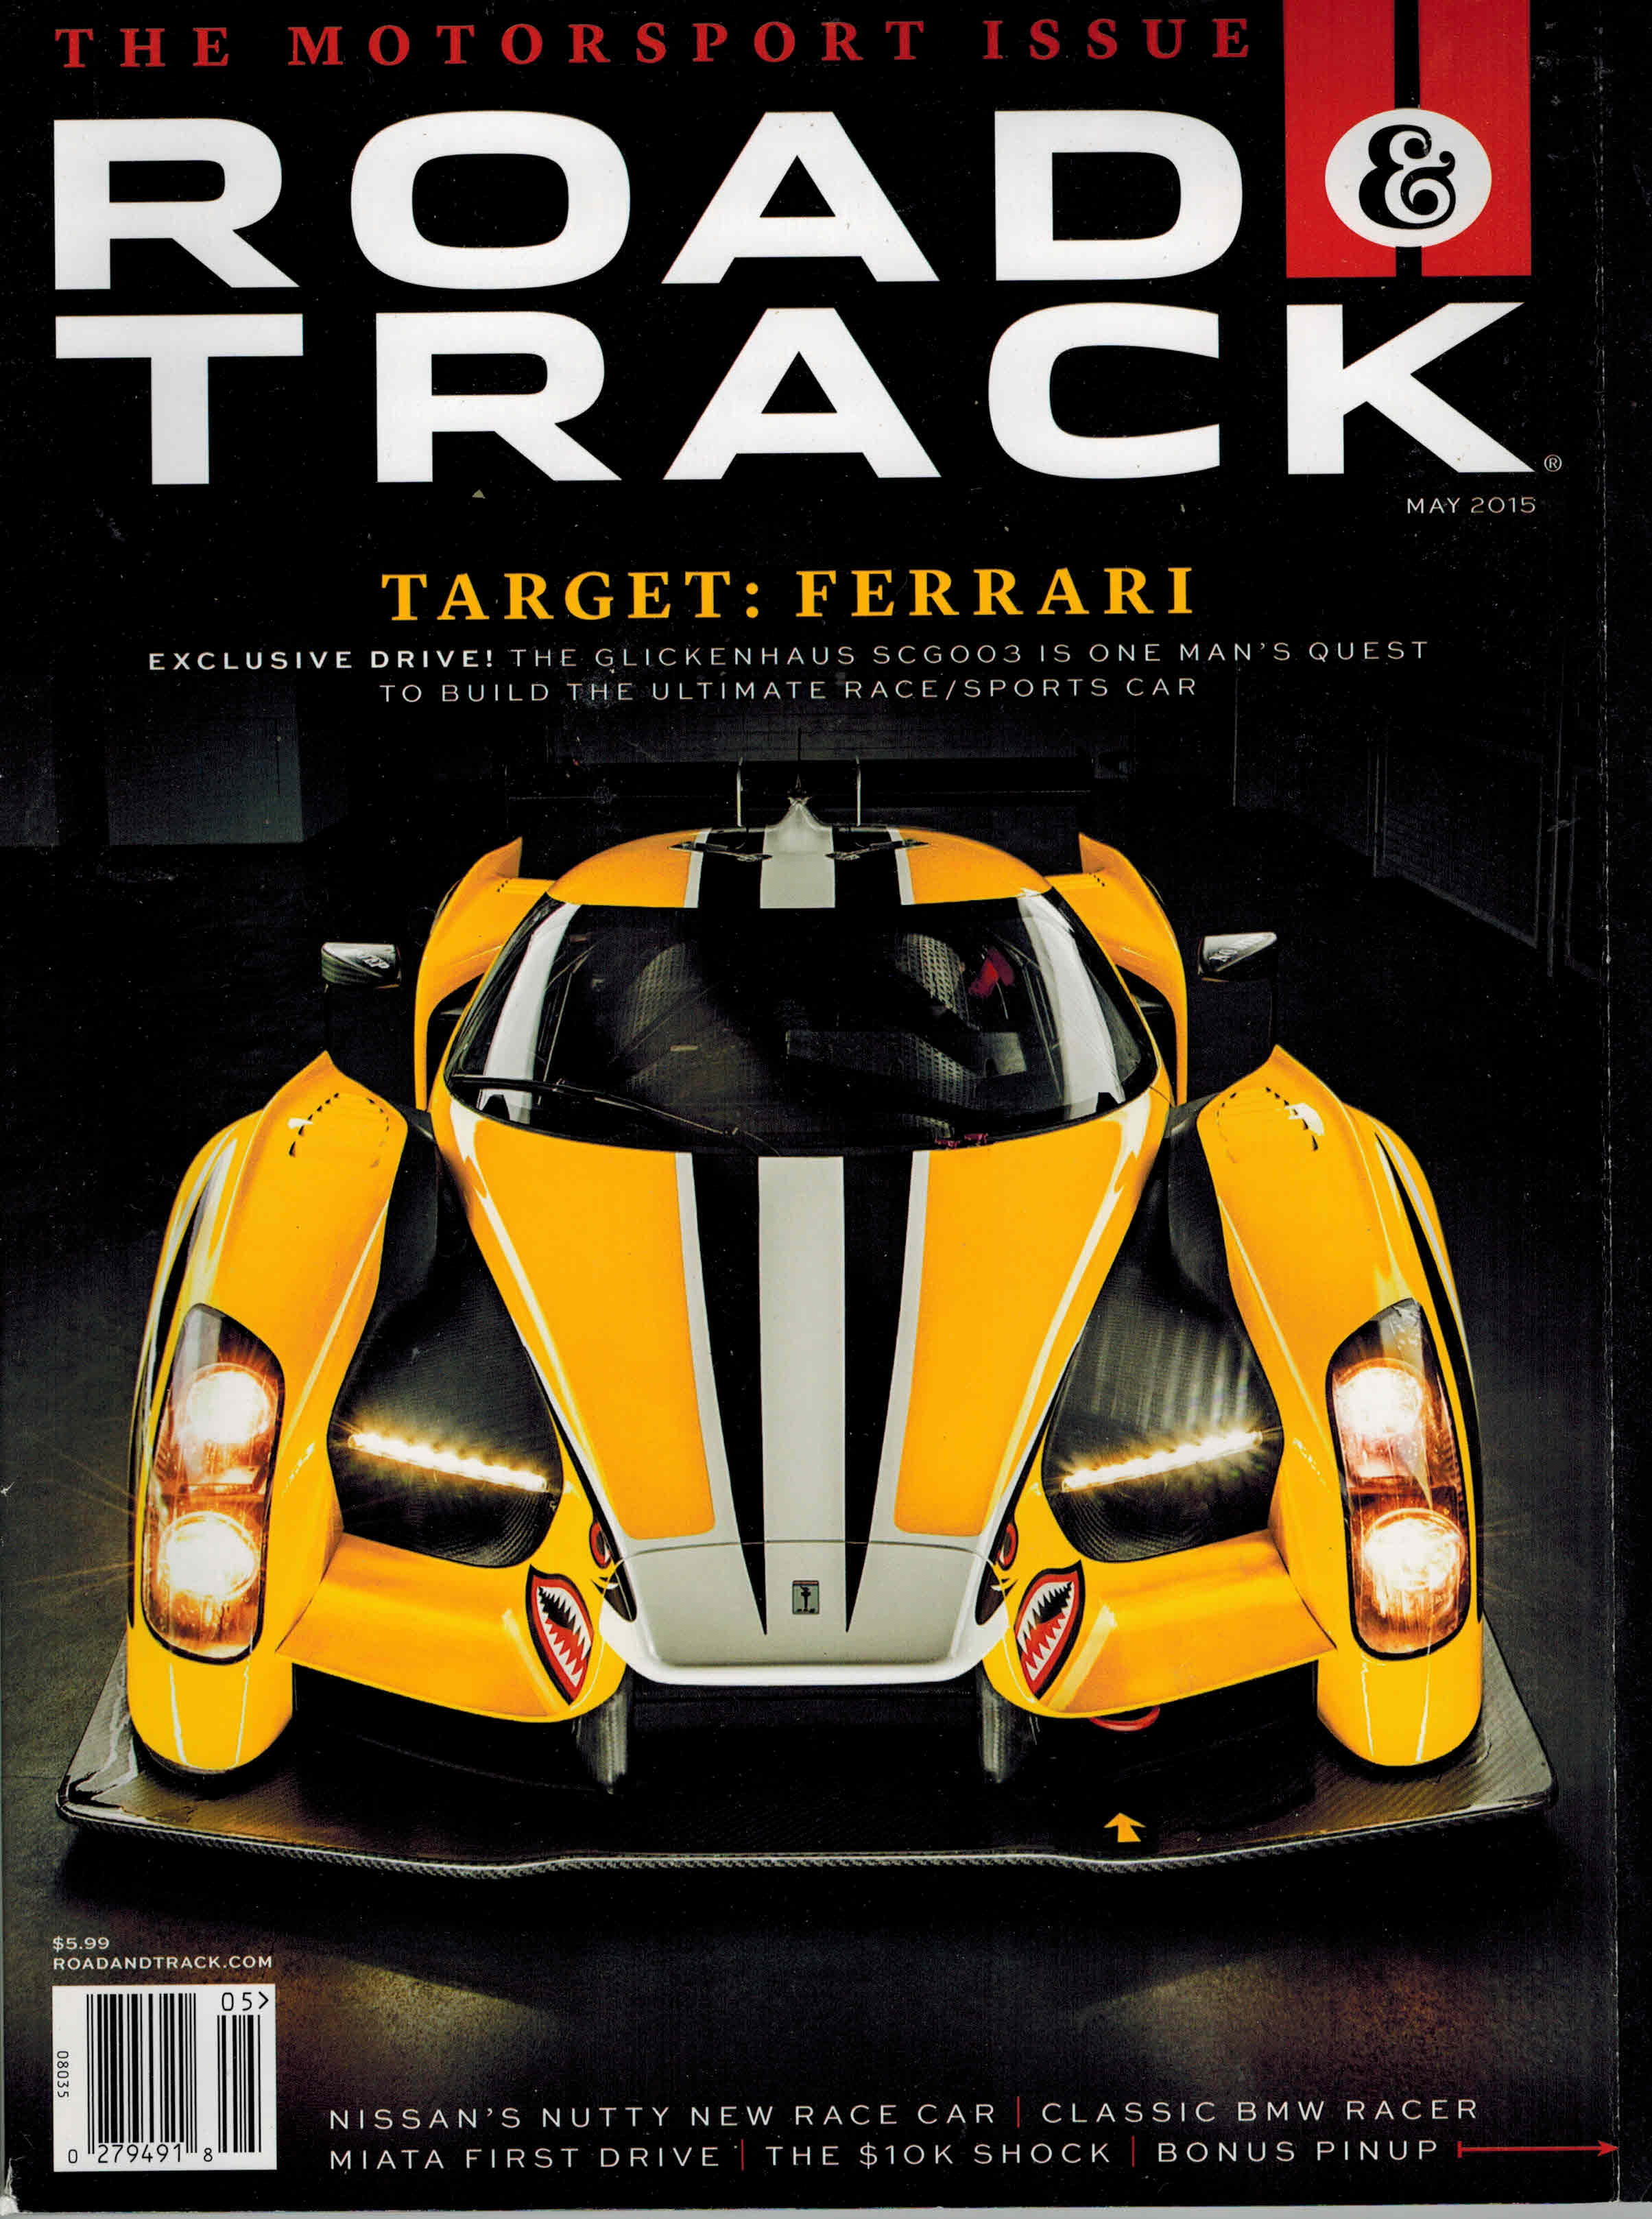 Image for Road & Track Magazine May 2015  Vol 66 No 8 Motorsport Issues Ferrari Cover